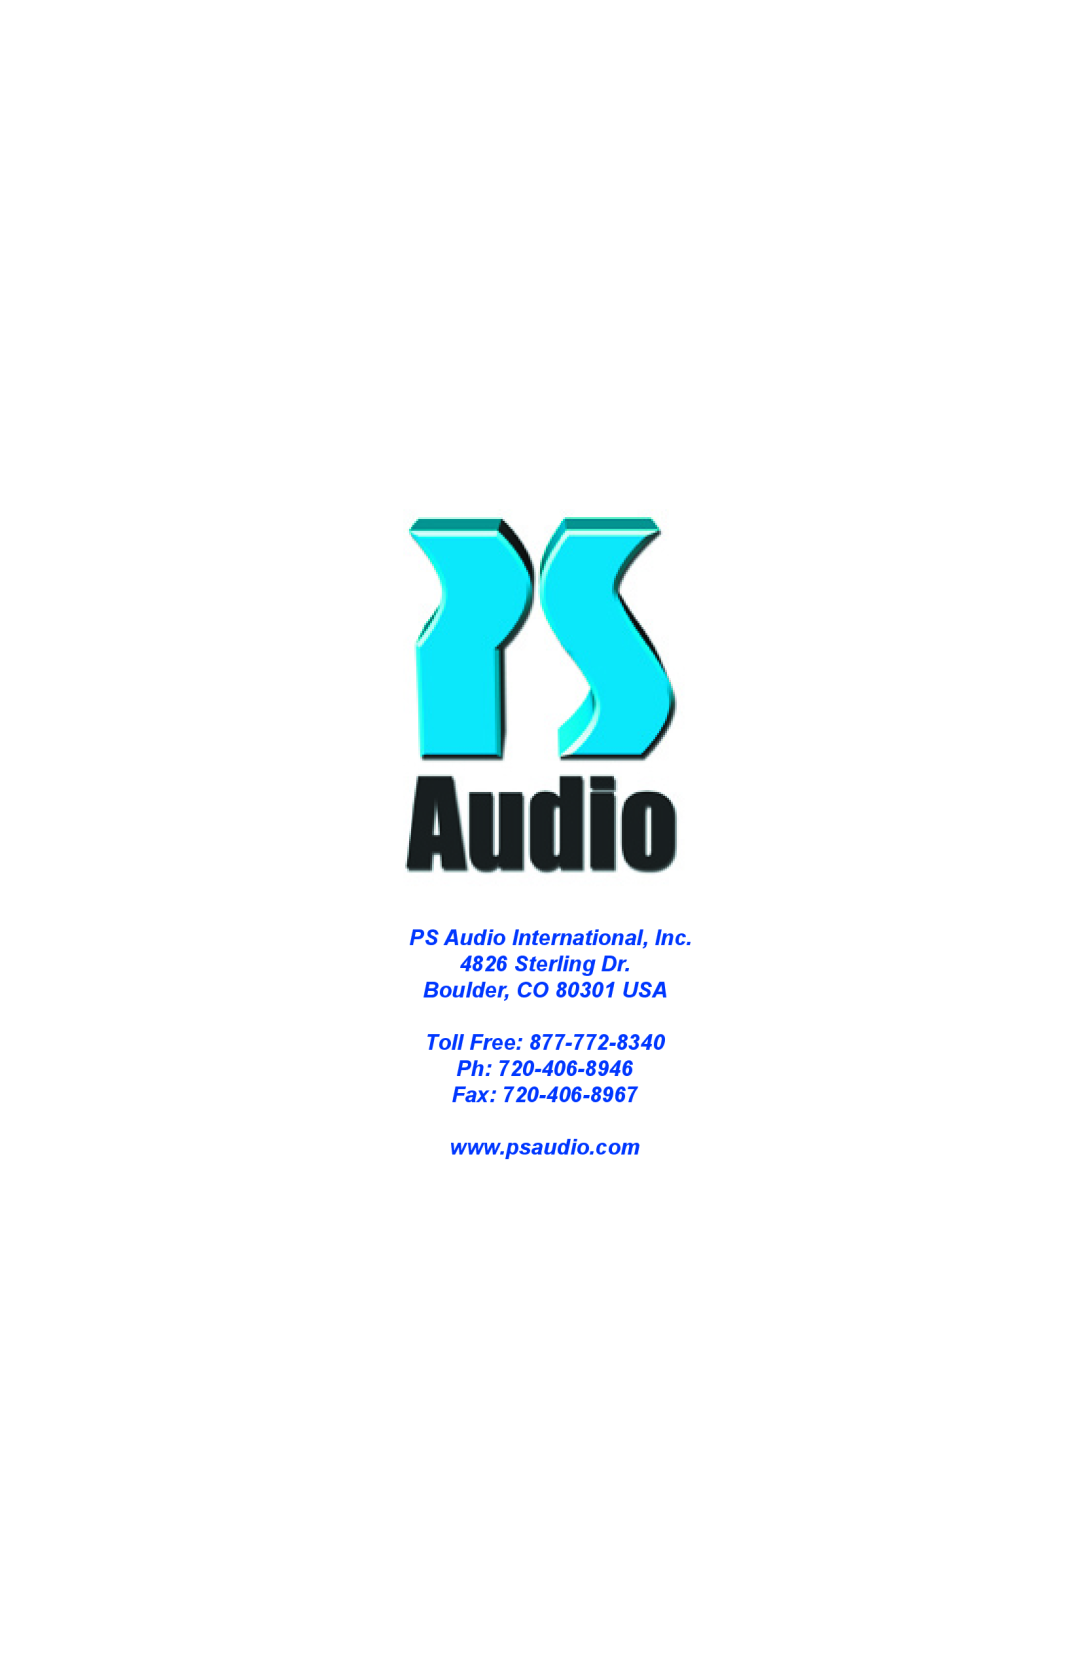 PS Audio PD 3.5 quick start PS Audio International, Inc 4826 Sterling Dr, Boulder, CO 80301 USA Toll Free Ph Fax 